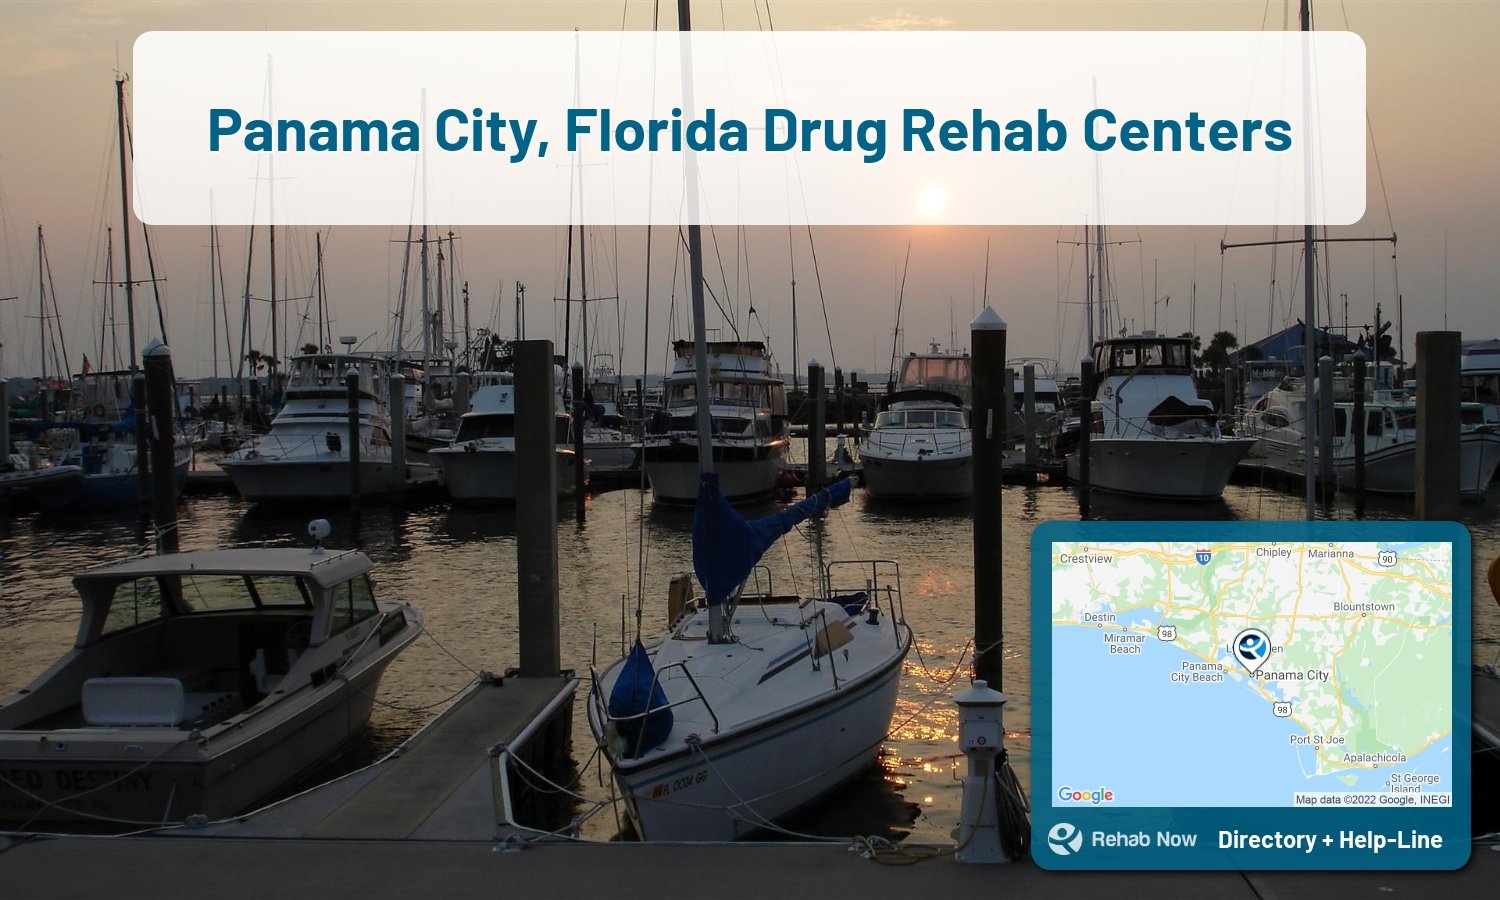 Panama City, FL Treatment Centers. Find drug rehab in Panama City, Florida, or detox and treatment programs. Get the right help now!